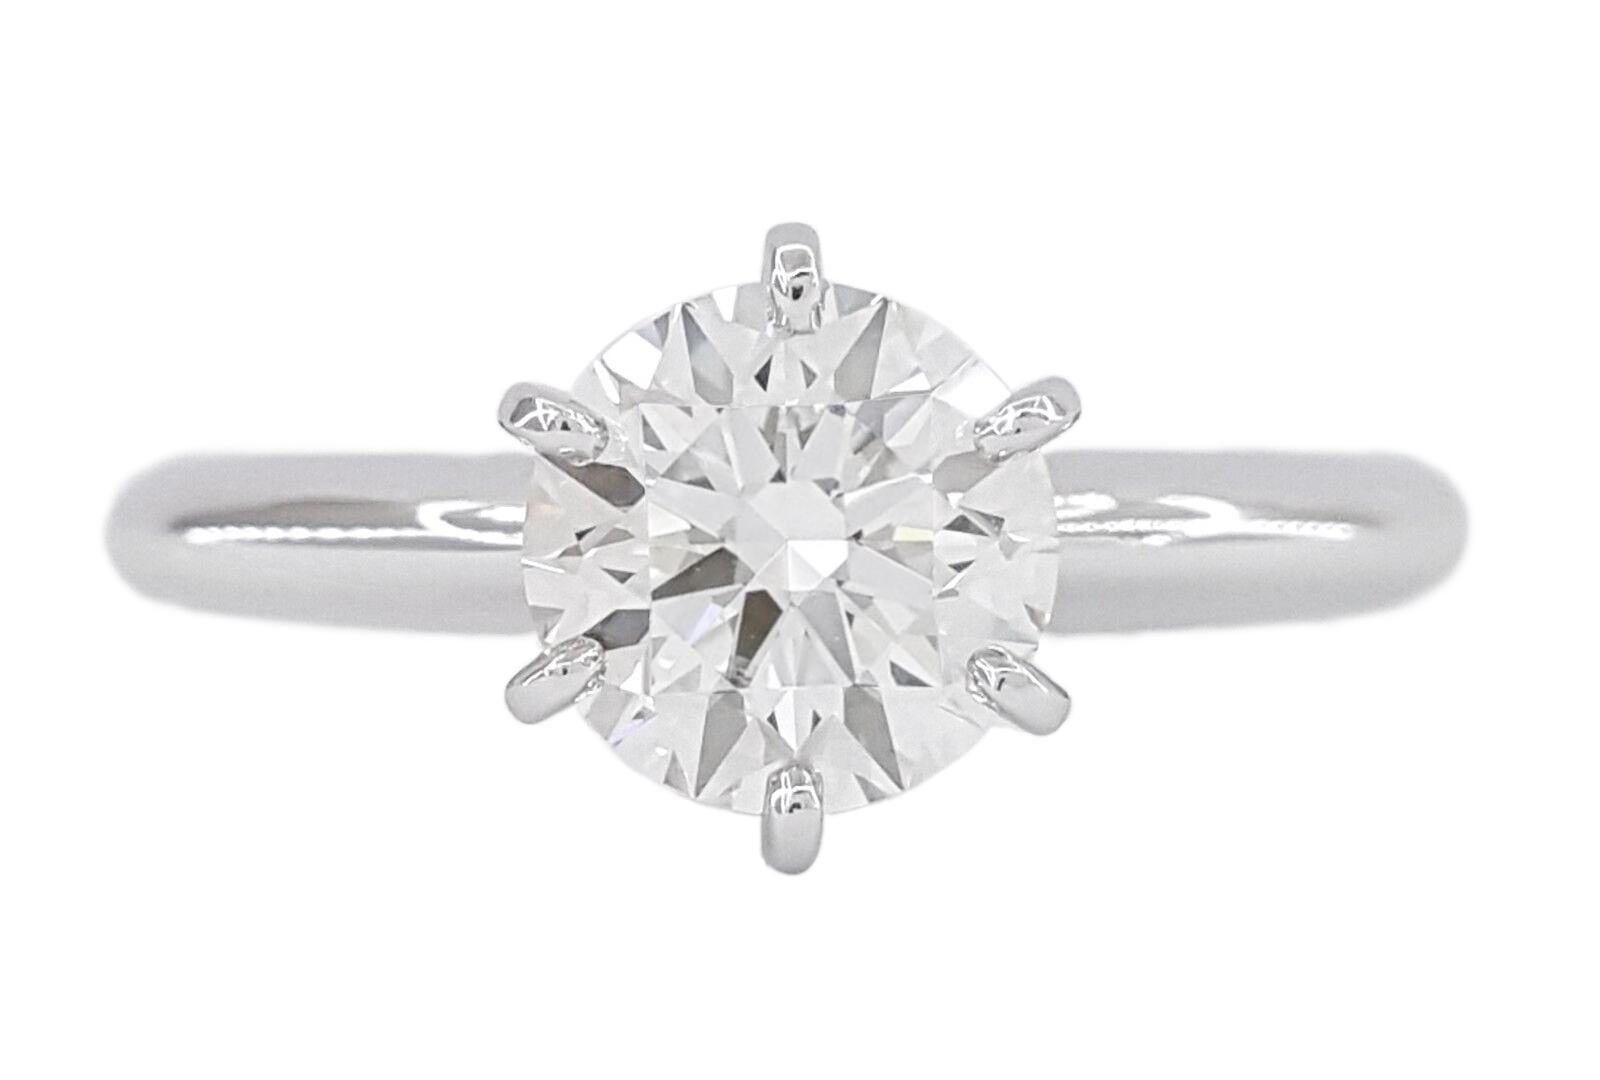 Introducing the timeless elegance of the GIA Certified 1 Ct Round Brilliant Diamond Solitaire Ring. This exquisite ring showcases a brilliant round-cut diamond, certified by the esteemed Gemological Institute of America (GIA) for its exceptional